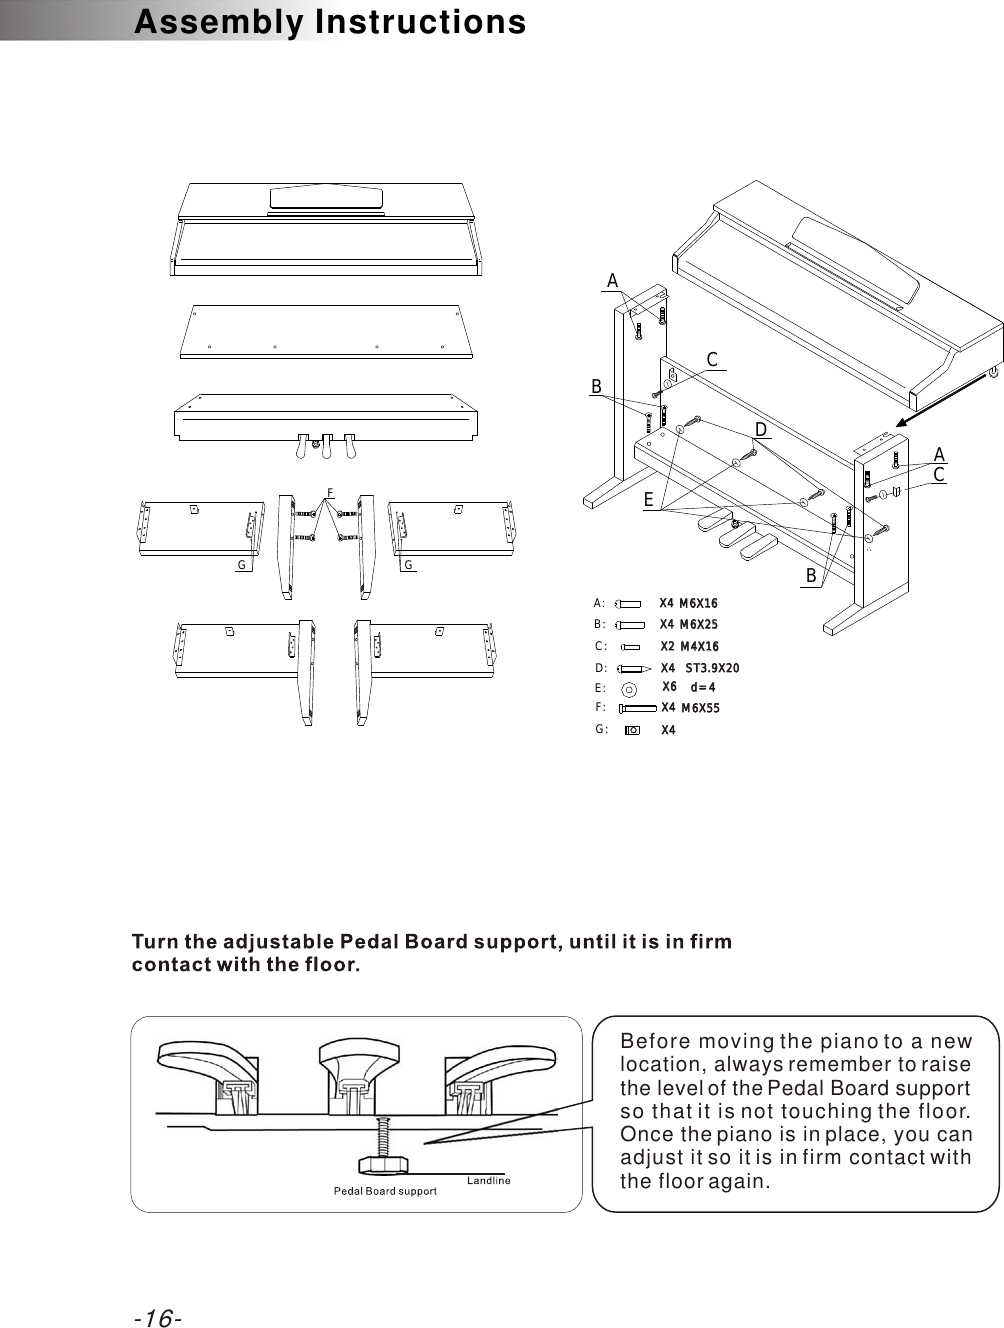 -16-Assembly InstructionsBefore moving the piano to a new location, always remember to raise the level of the Pedal Board support so that it is not touching the floor. Once the piano is in place, you can adjust it so it is in firm contact with the floor again.CCd=4d=4E: X6X6AABBX4X4X2X2X4X4X4X4 M6X25M6X25M6X16M6X16M4X16M4X16ST3.9X20ST3.9X20D:C:A:B:DEFGG: X4X4F: M6X55M6X55X4X4G